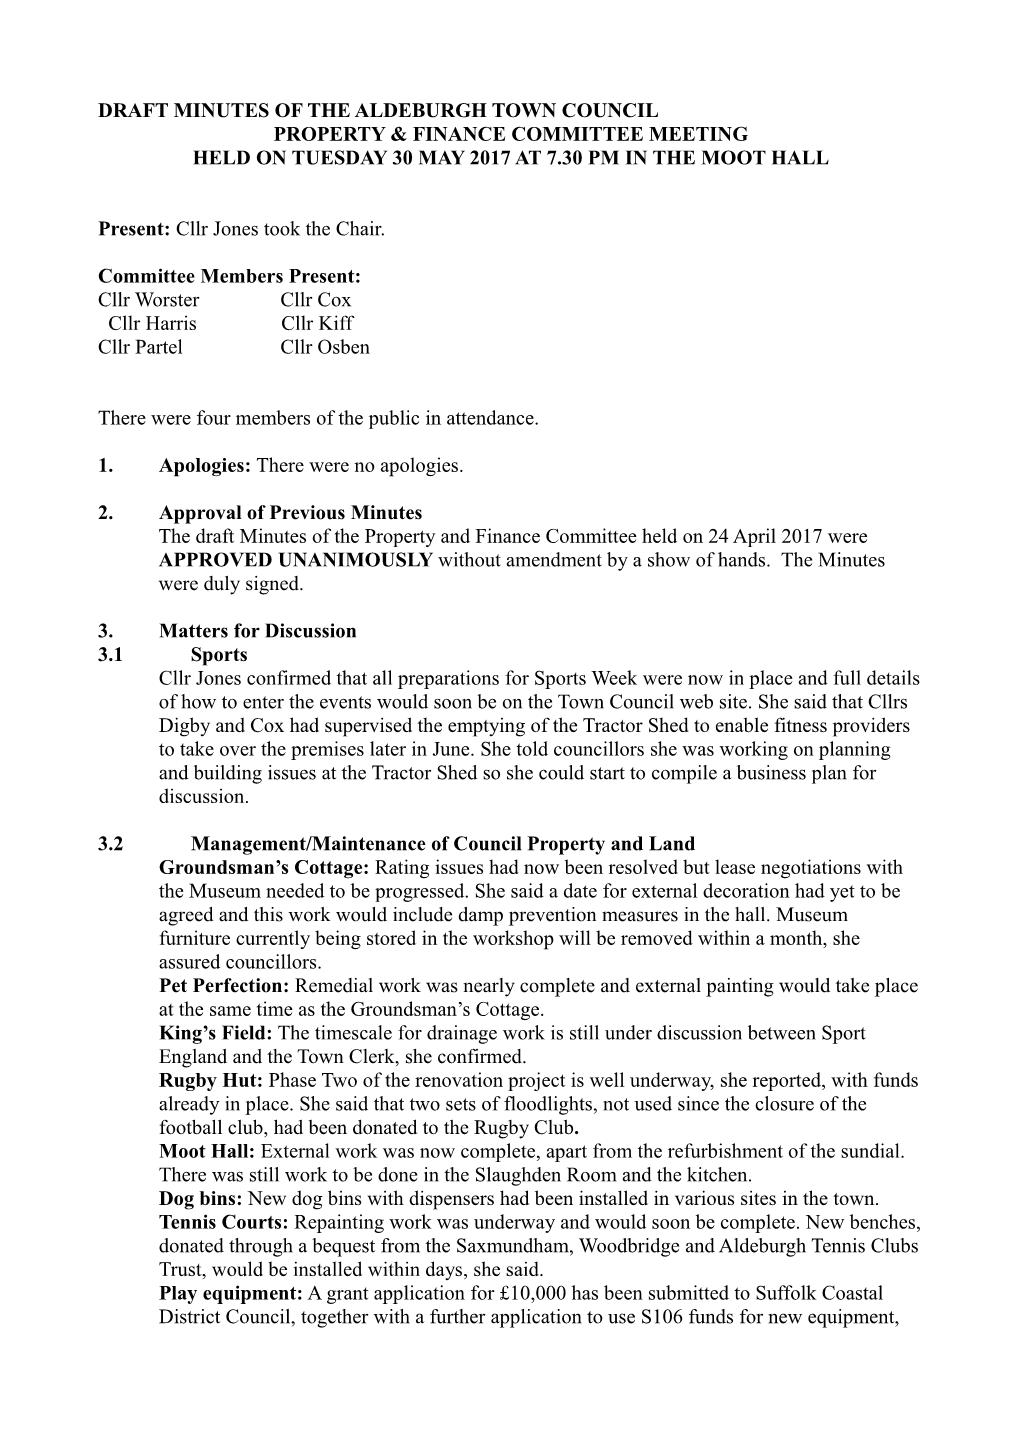 Draft Minutes of the Aldeburgh Town Council